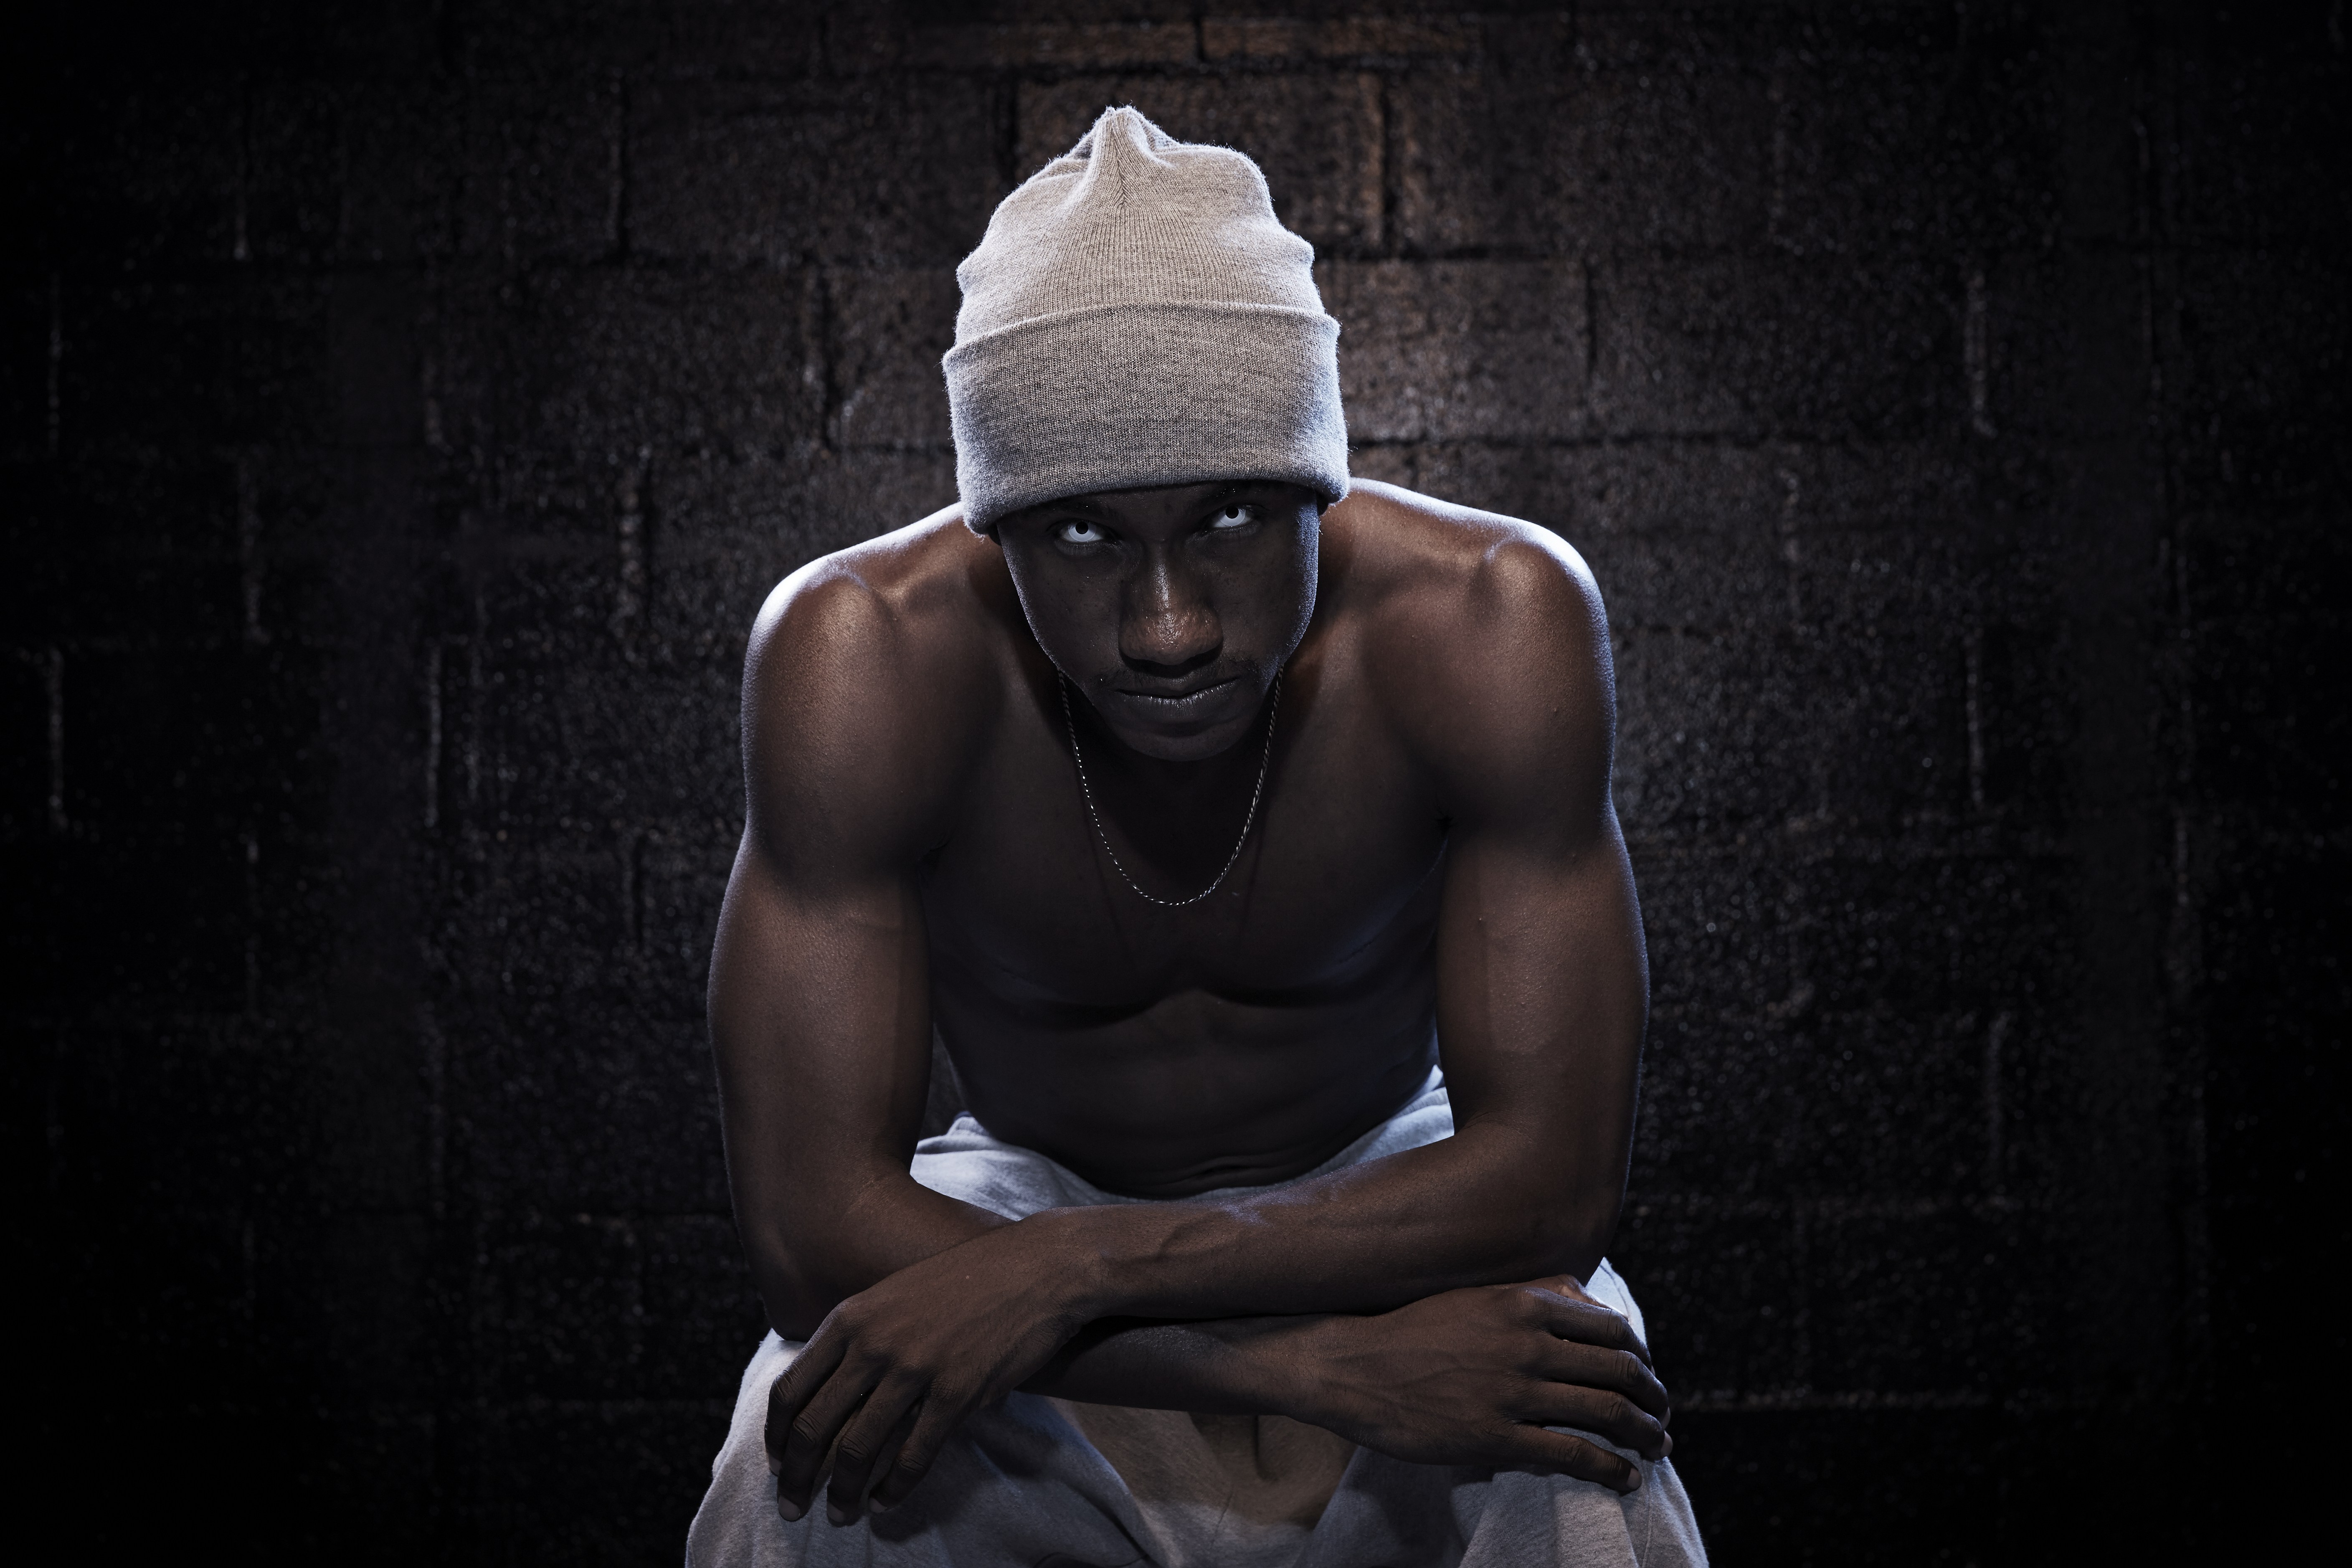 hopsin ill mind of hopsin 8 what is it about